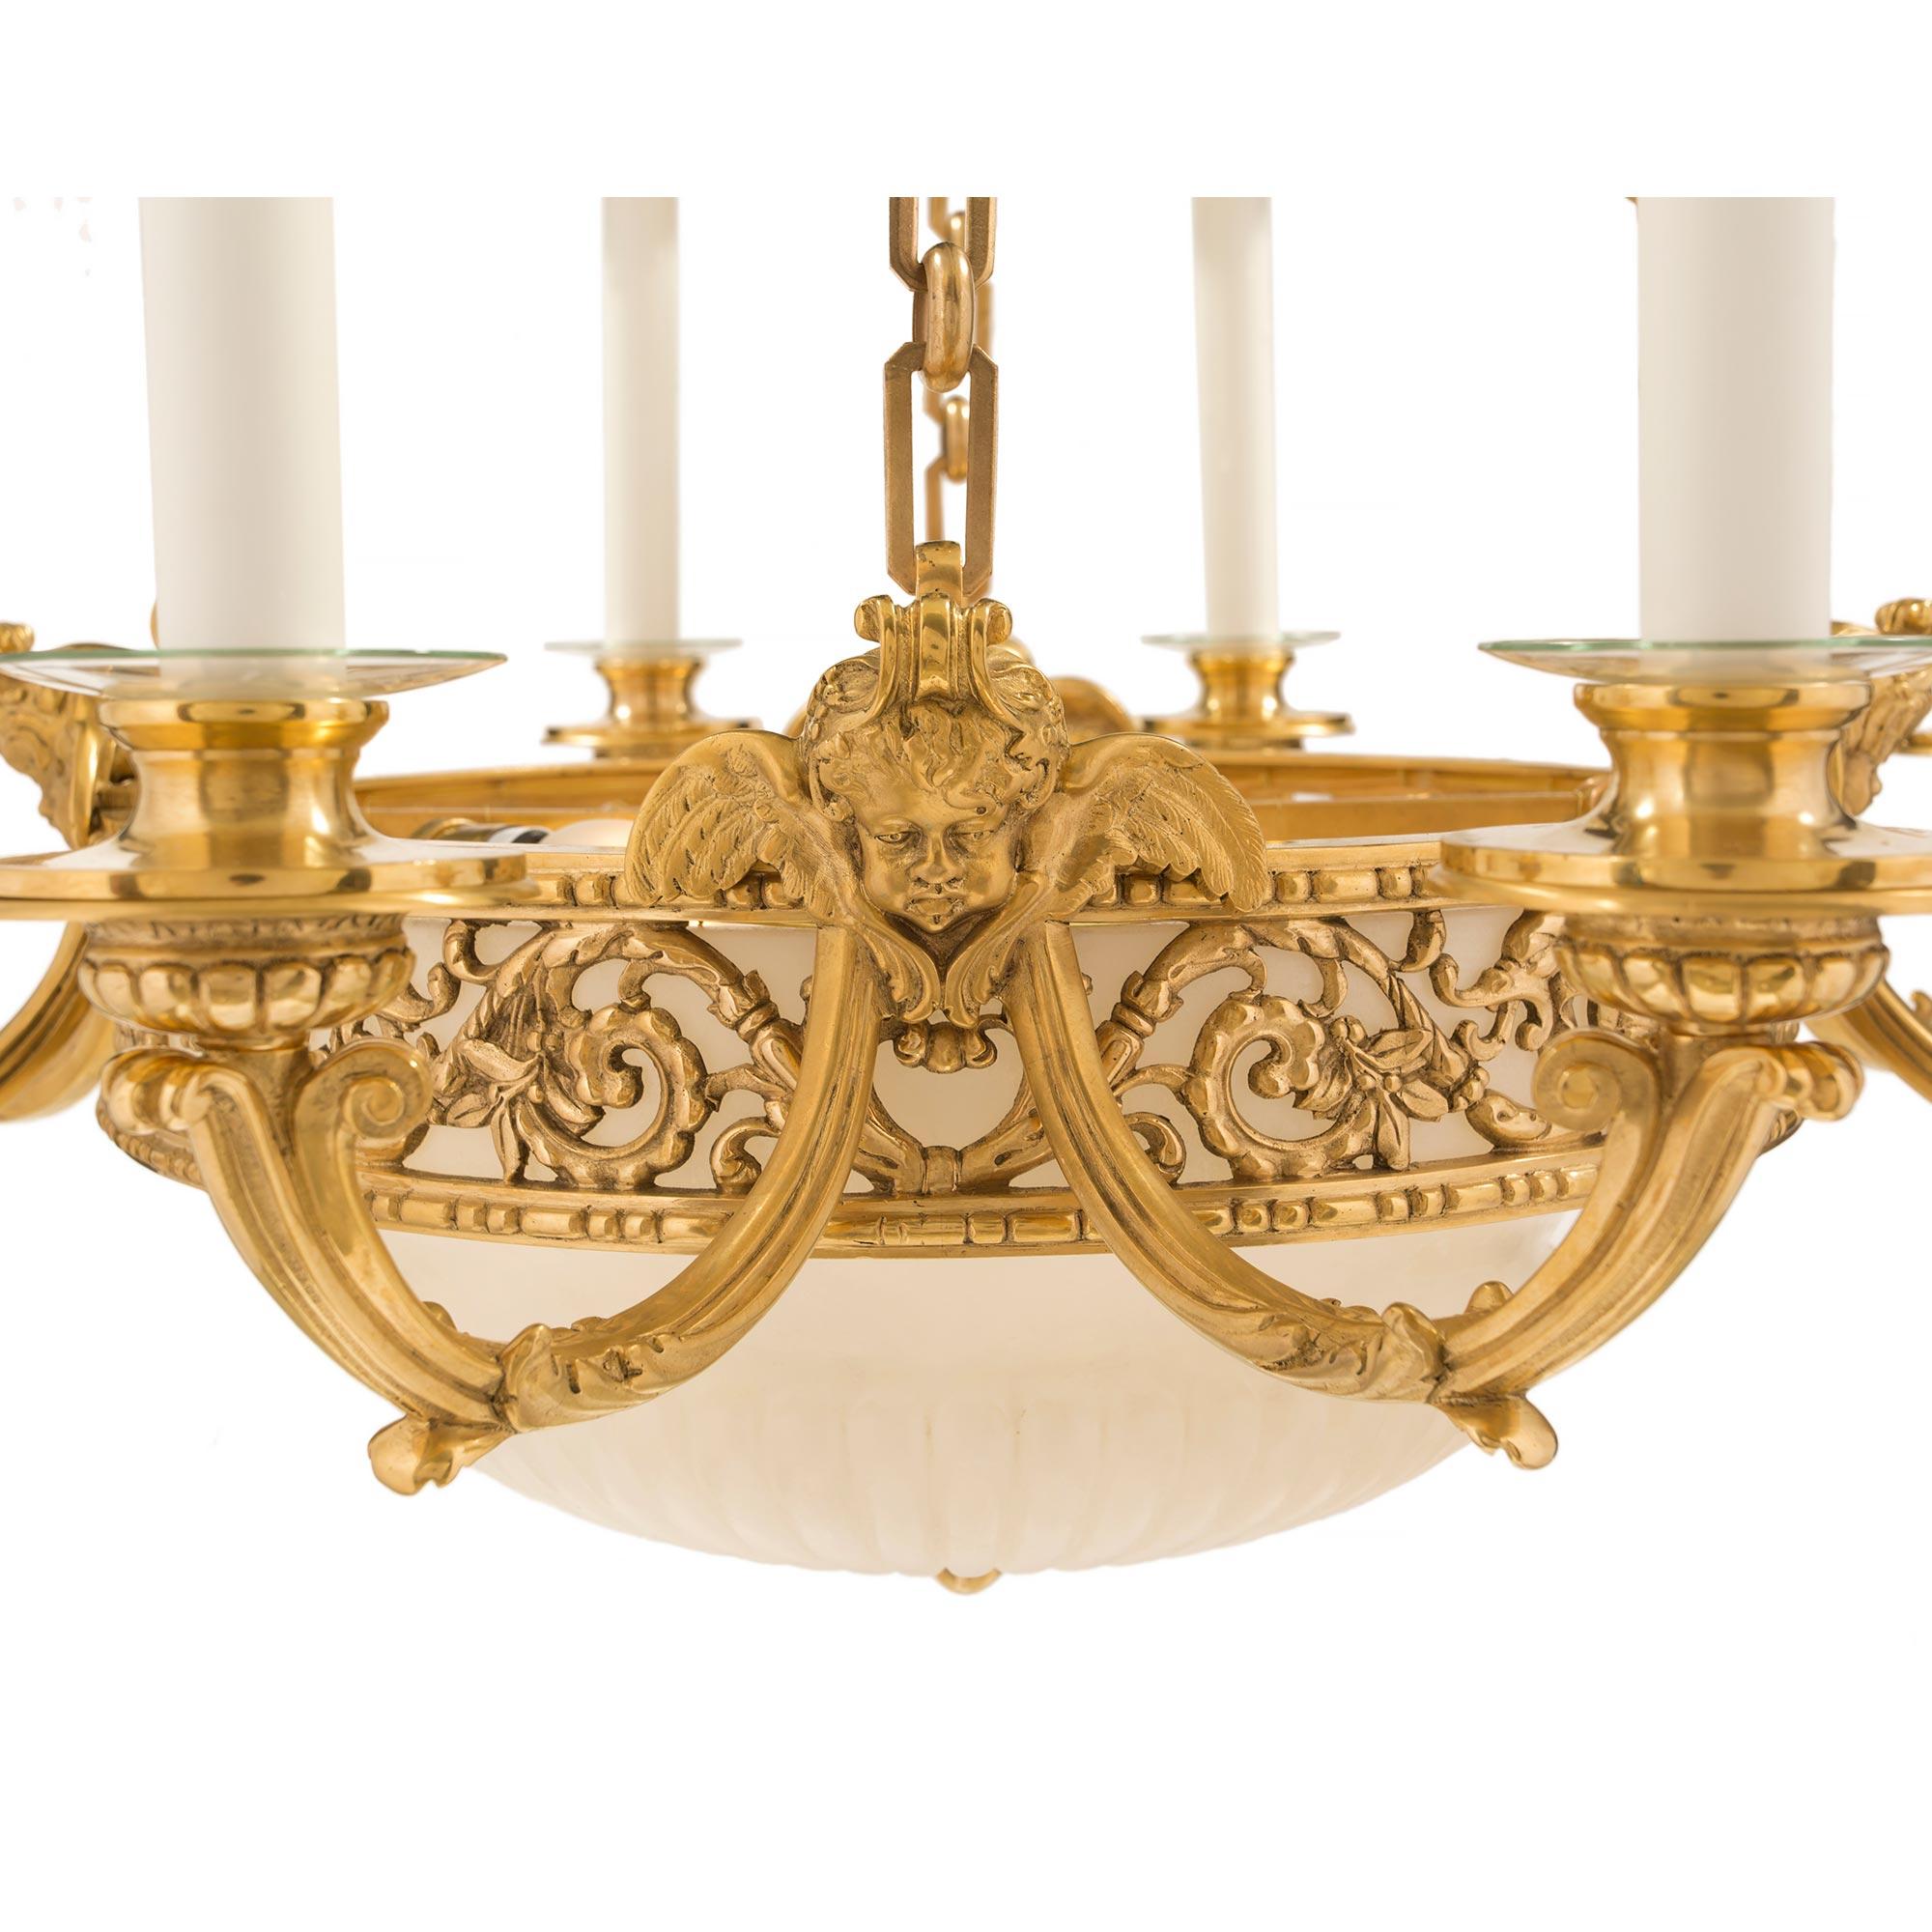 French 19th Century Louis XVI Style Ormolu and Alabaster Twelve-Light Chandelier For Sale 1